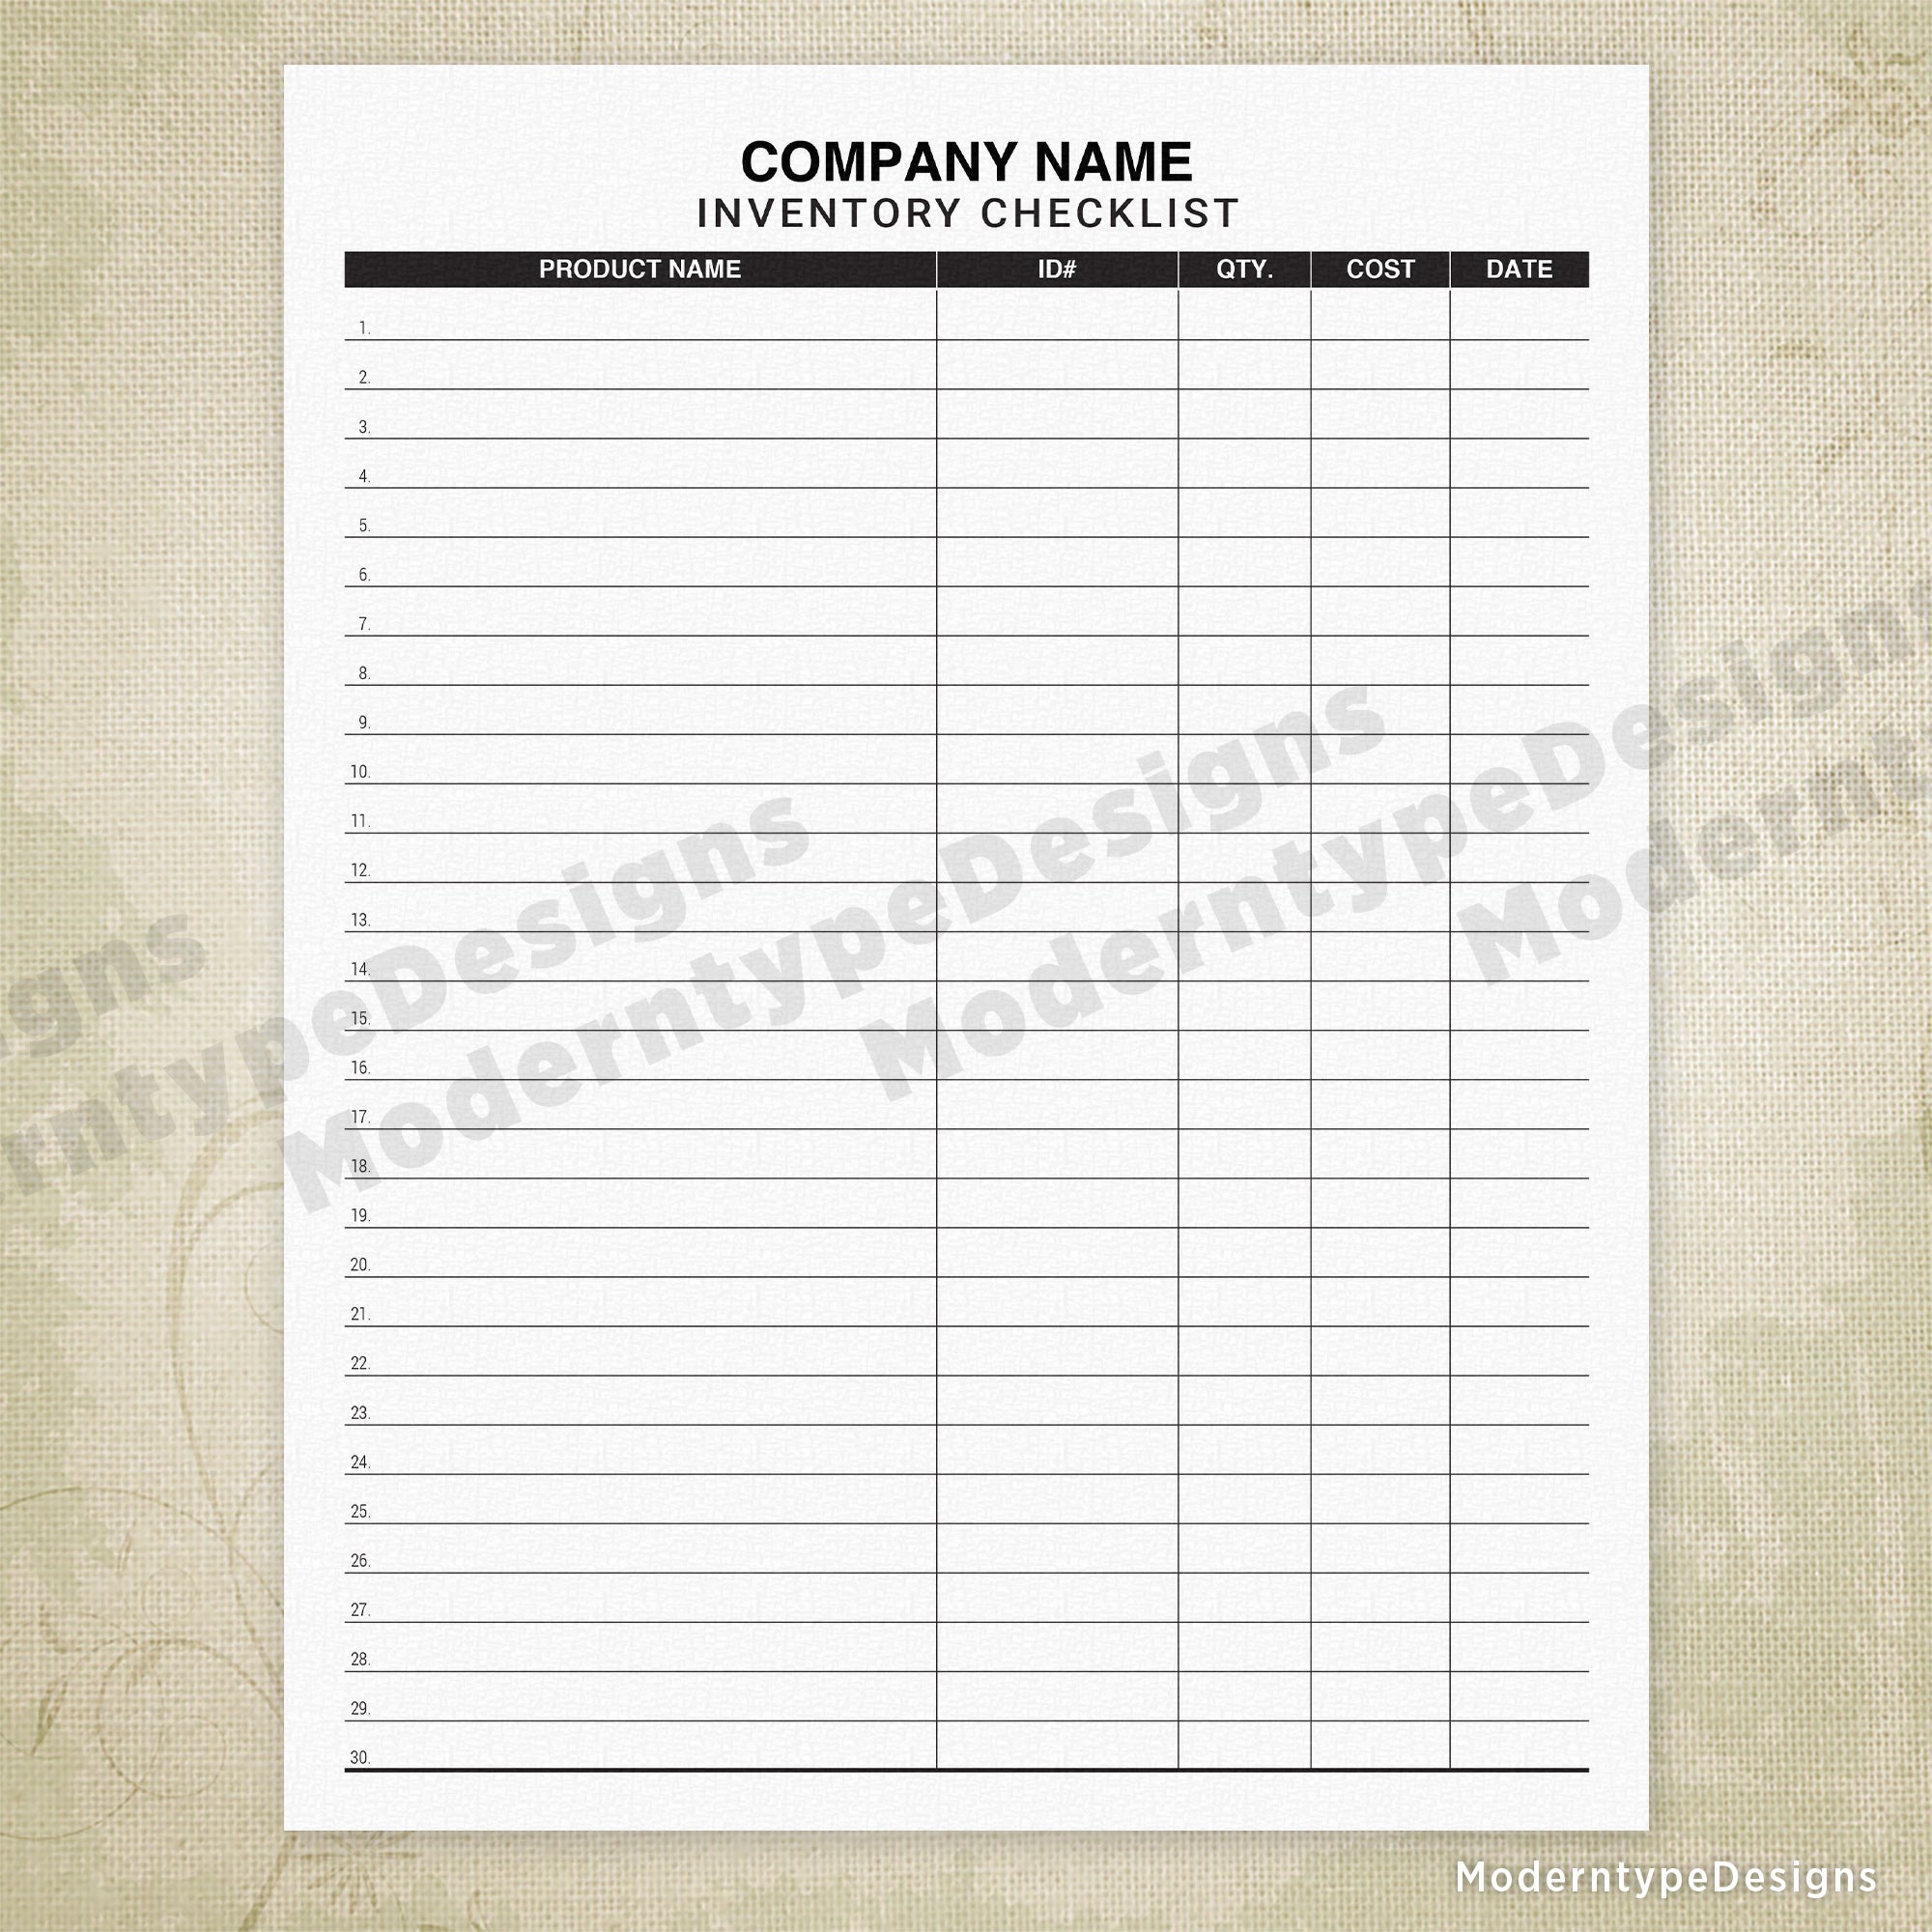 Inventory Checklist Tracker Printable, Personalized